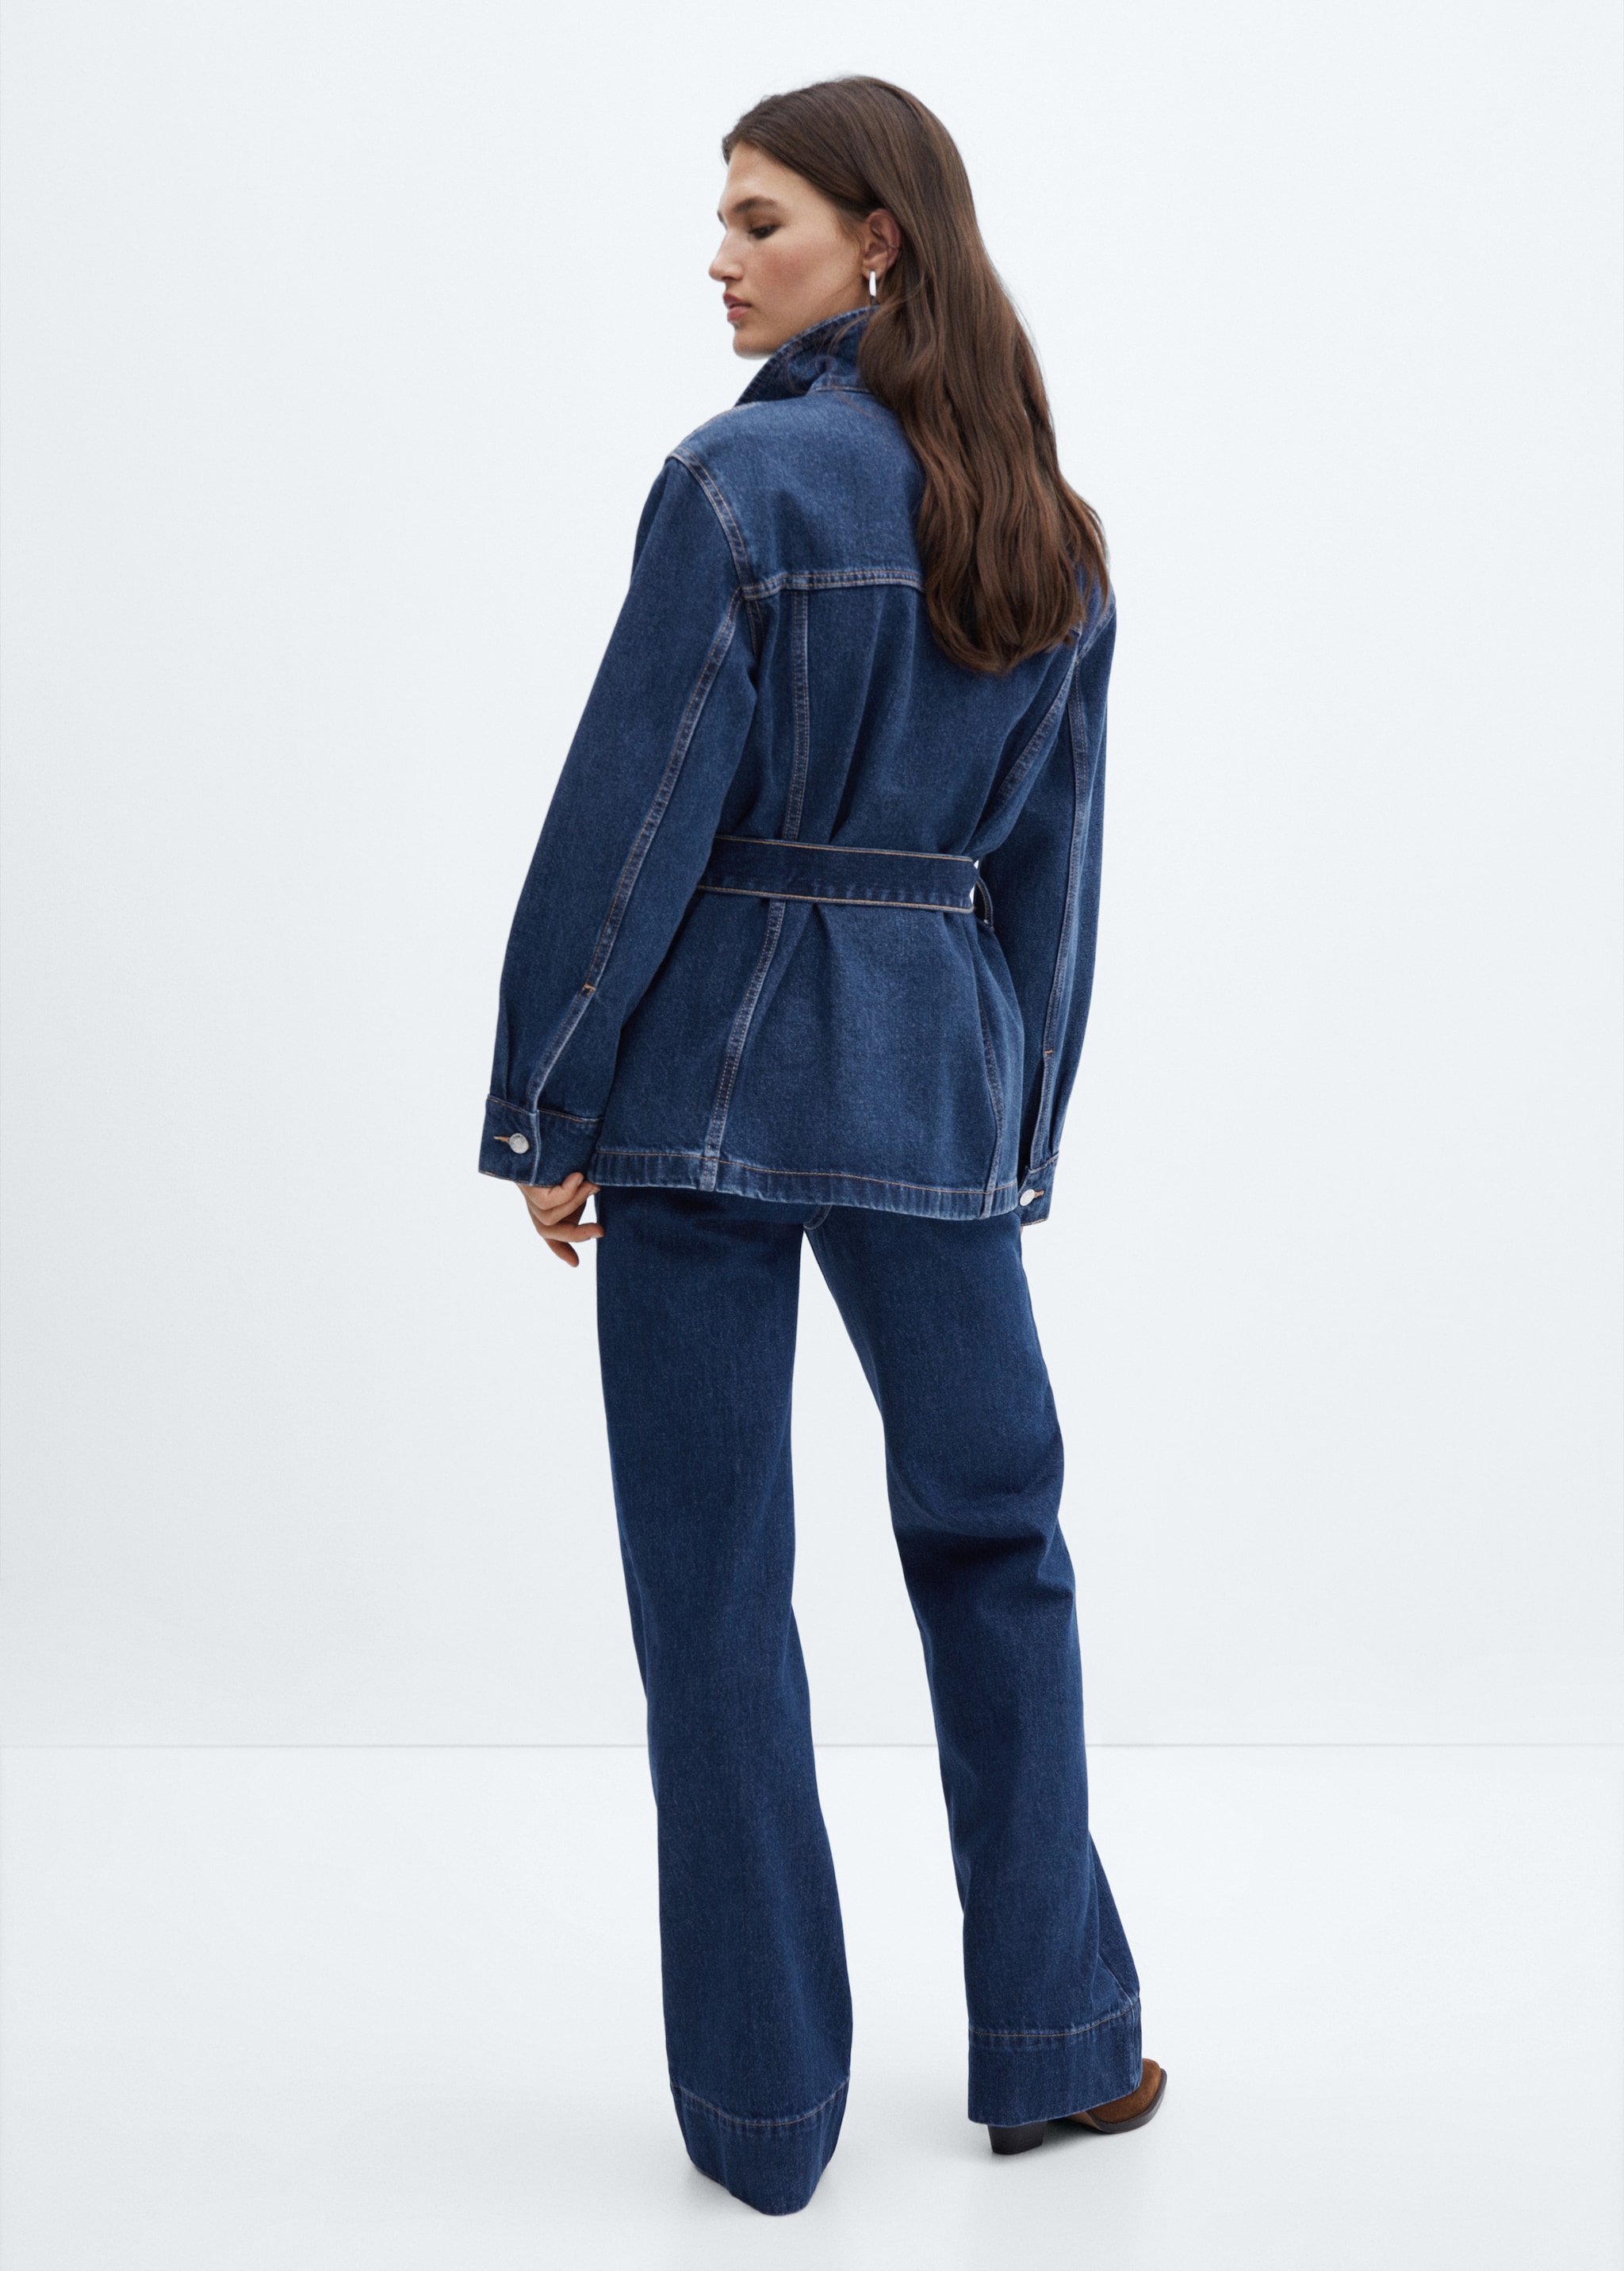 Denim jacket with belt - Reverse of the article